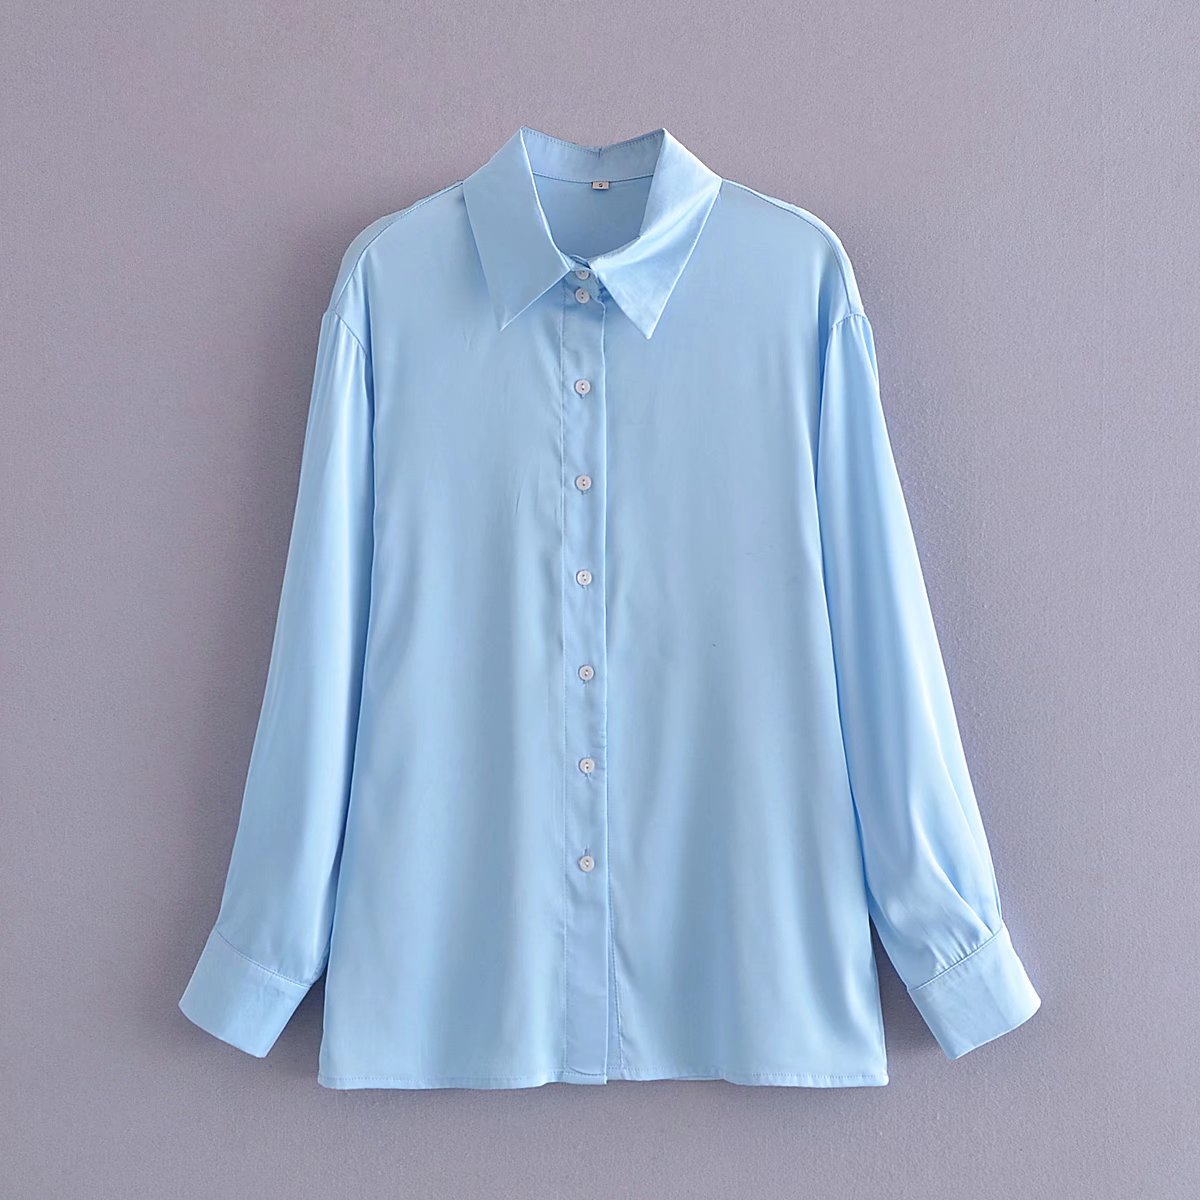 OOTDGIRL Women Fashion Loose Asymmetry Poplin Blouses Vintage Long Sleeve Button-Up Female Shirts Blusas Chic Tops